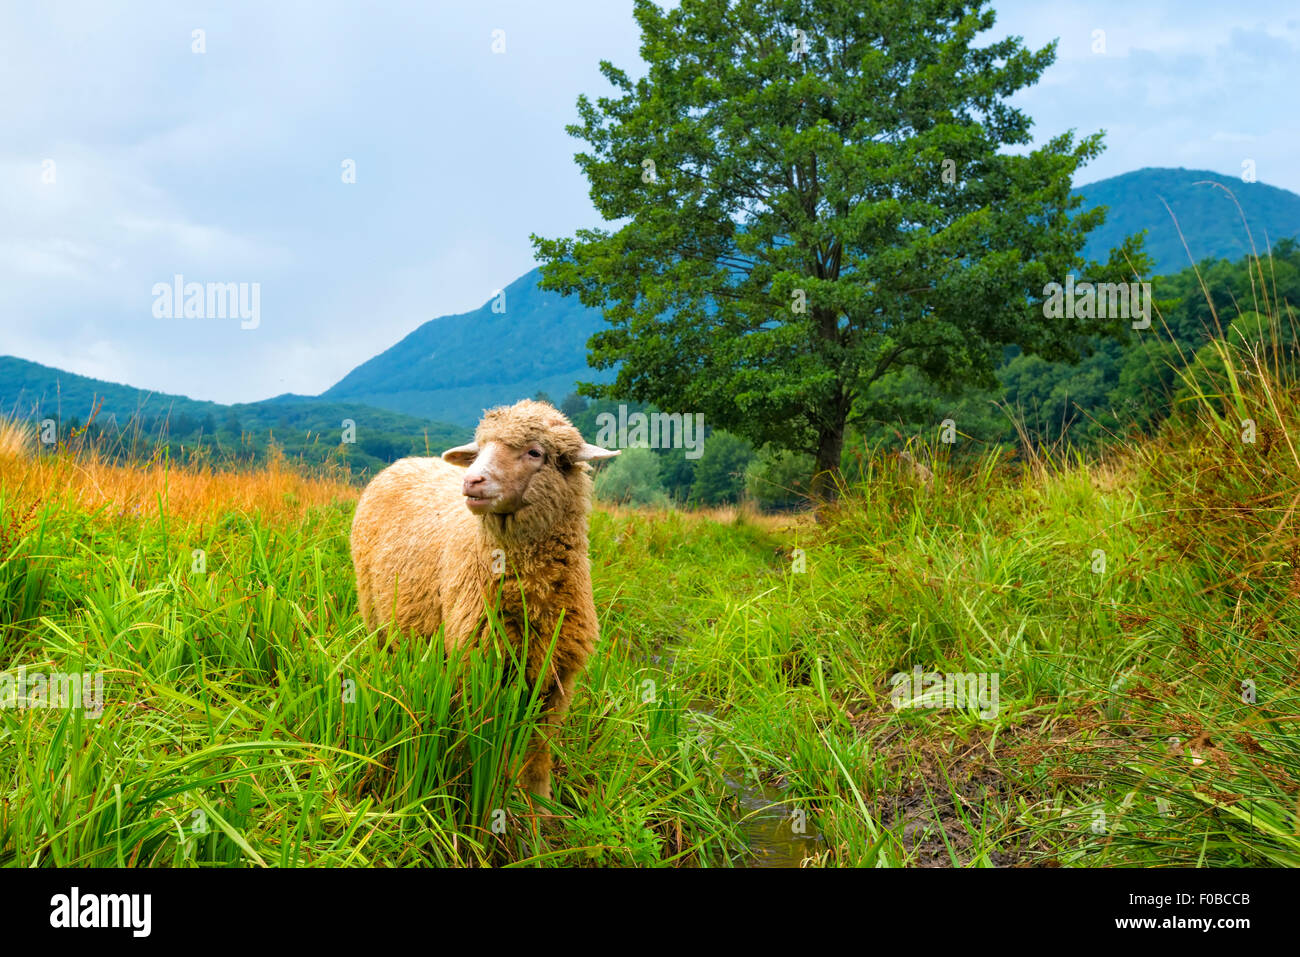 Sheep in a summer landscape Stock Photo